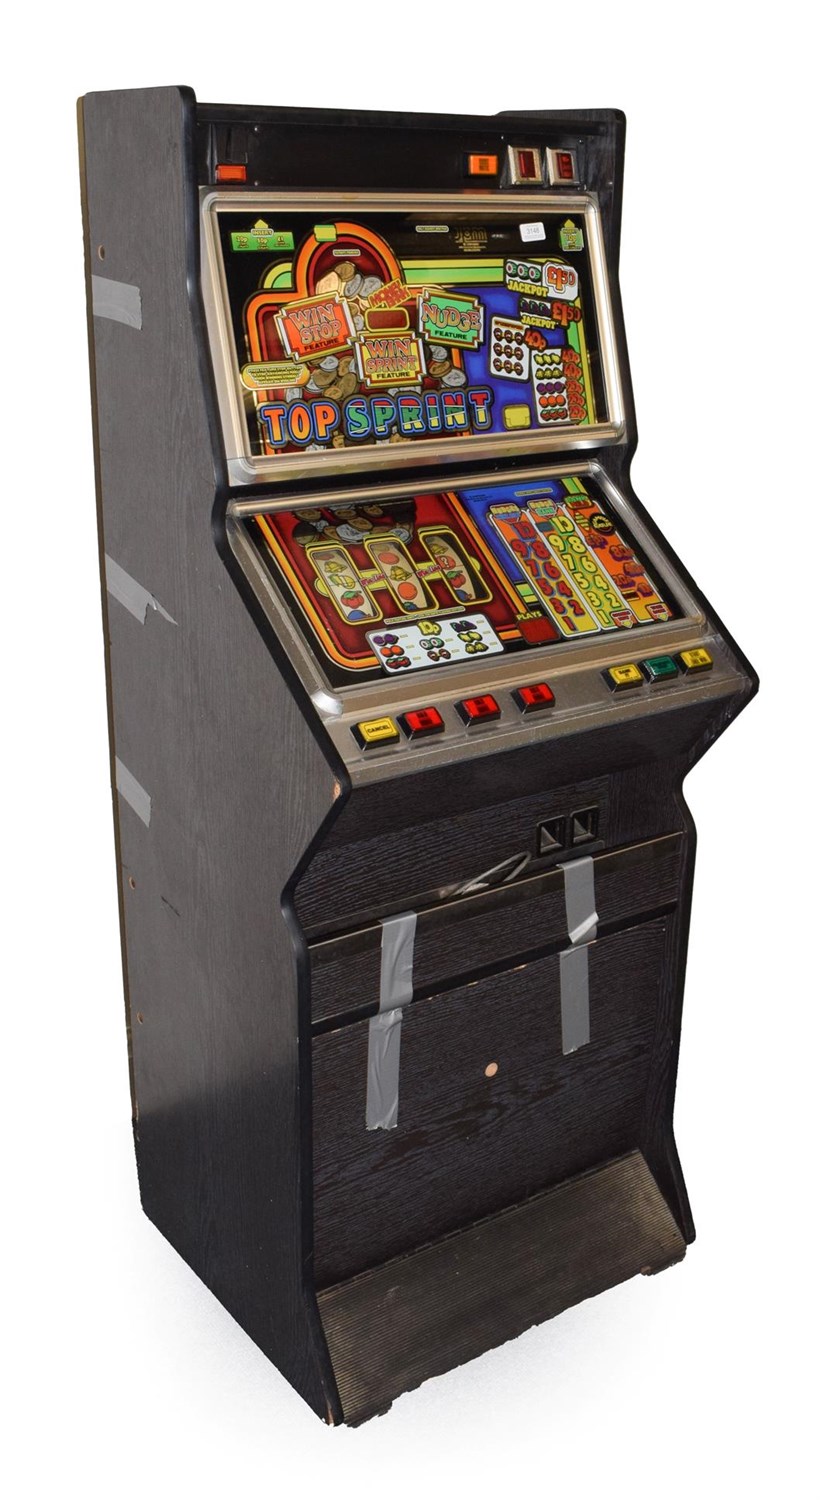 Lot 3148 - Top Sprint Electronic Amusement Machine with three reels, taking (old) 10p coins for two plays,...